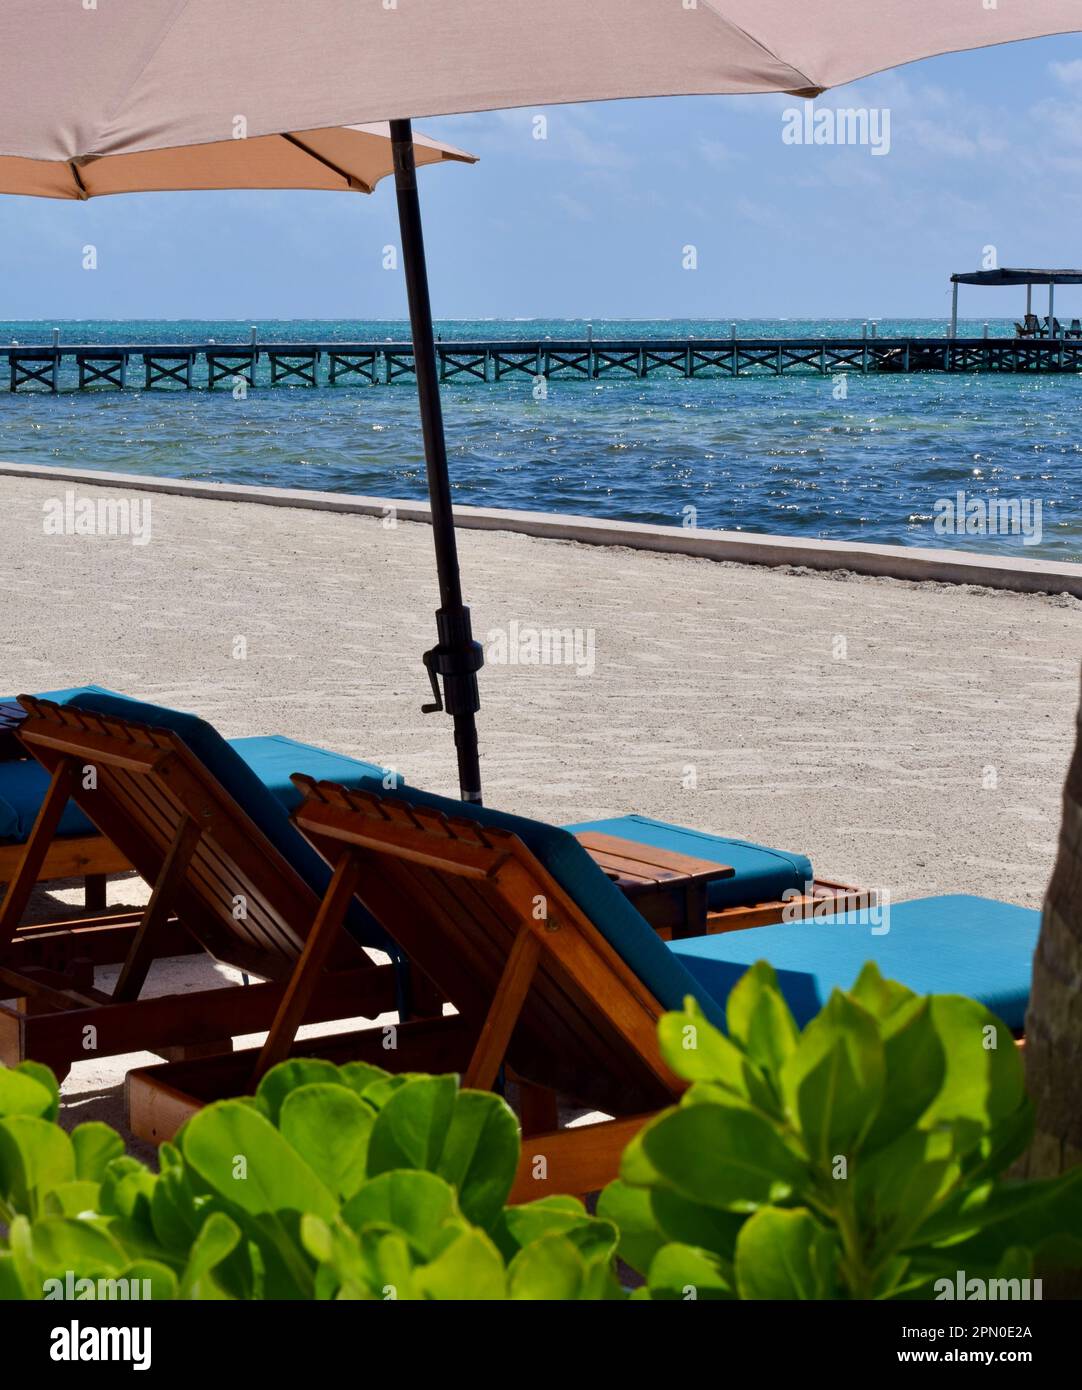 Lounge chairs under a parasol and facing the sea, at the beach, on a sunny day in San Pedro, Ambergris Caye, Belize, Caribbean/Central America. Stock Photo